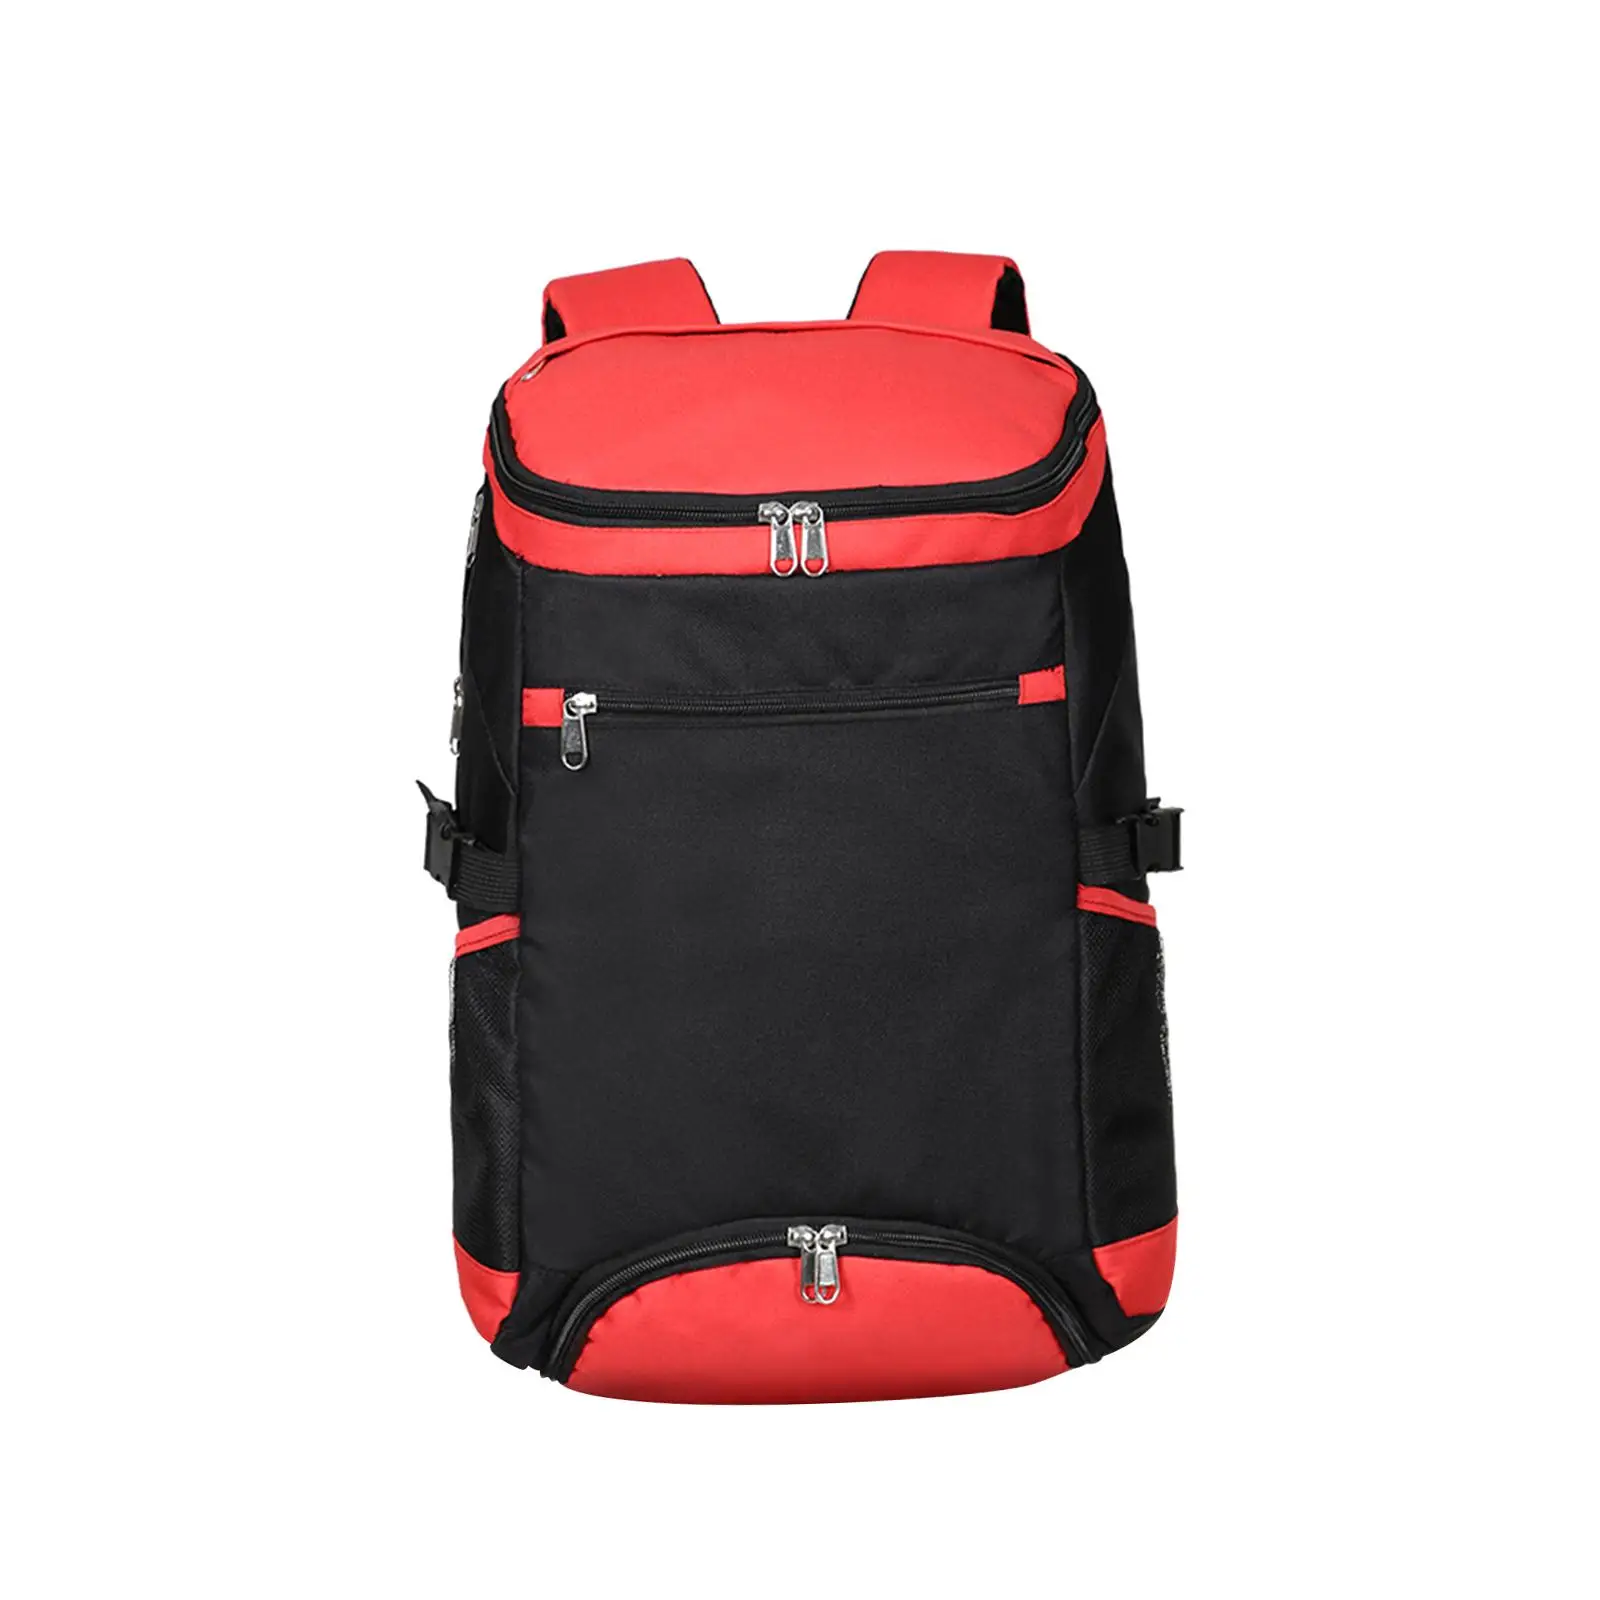 Tennis Backpack Large with Shoe Compartment Tennis Bag for Outdoor Sports Pickleball Racket Squash Racquets Balls Accessories